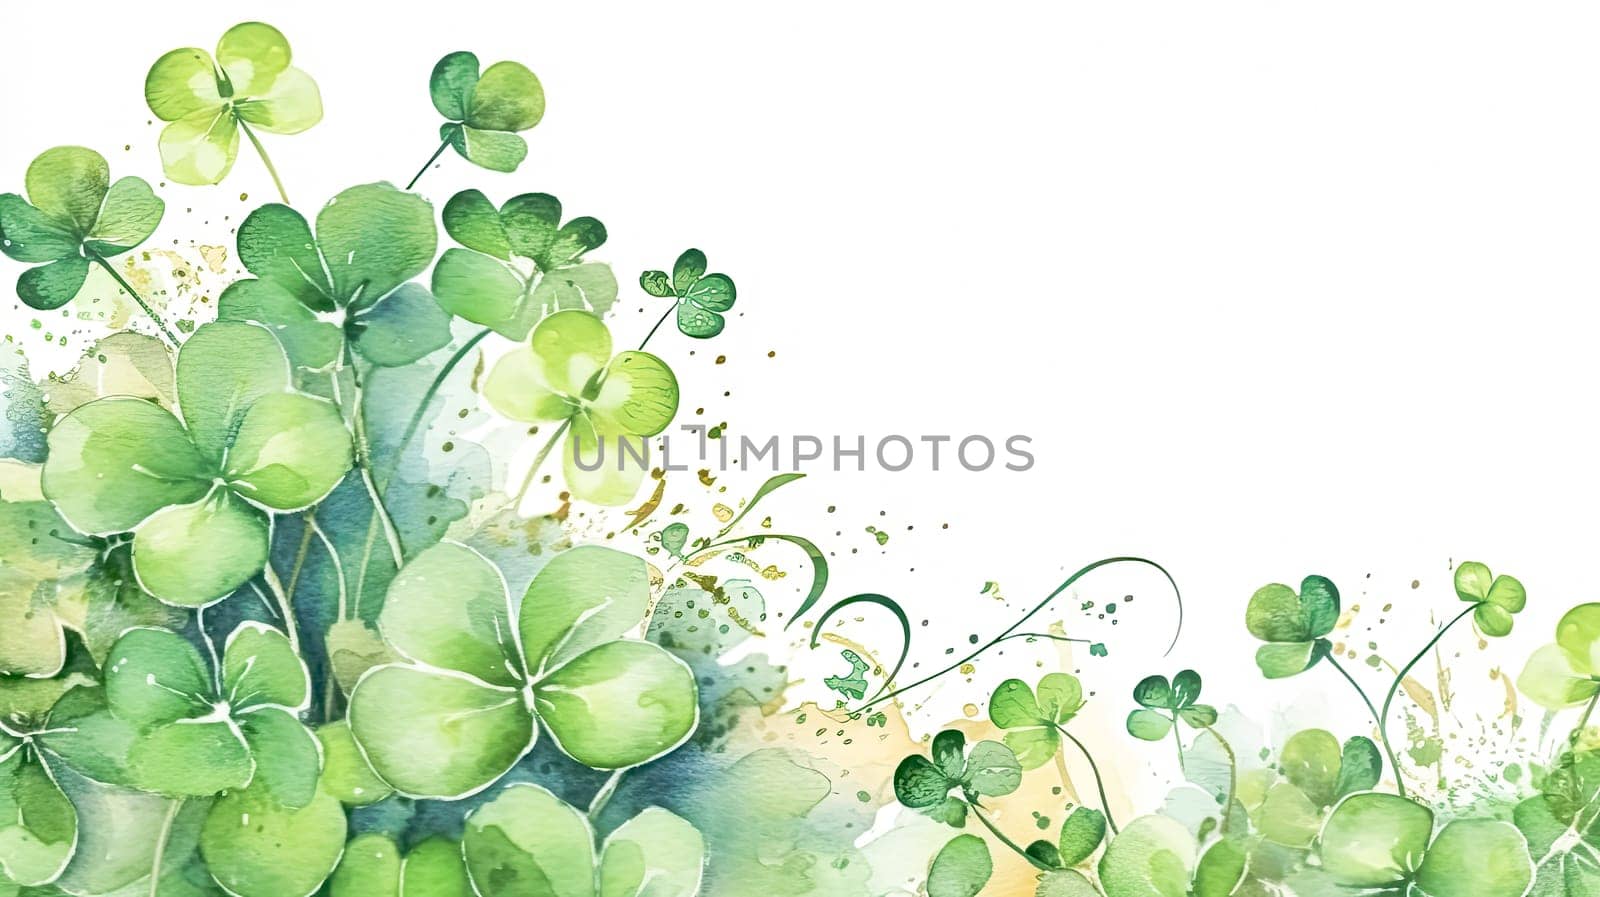 a watercolor image showcases the delicate beauty of the clover by Alla_Morozova93